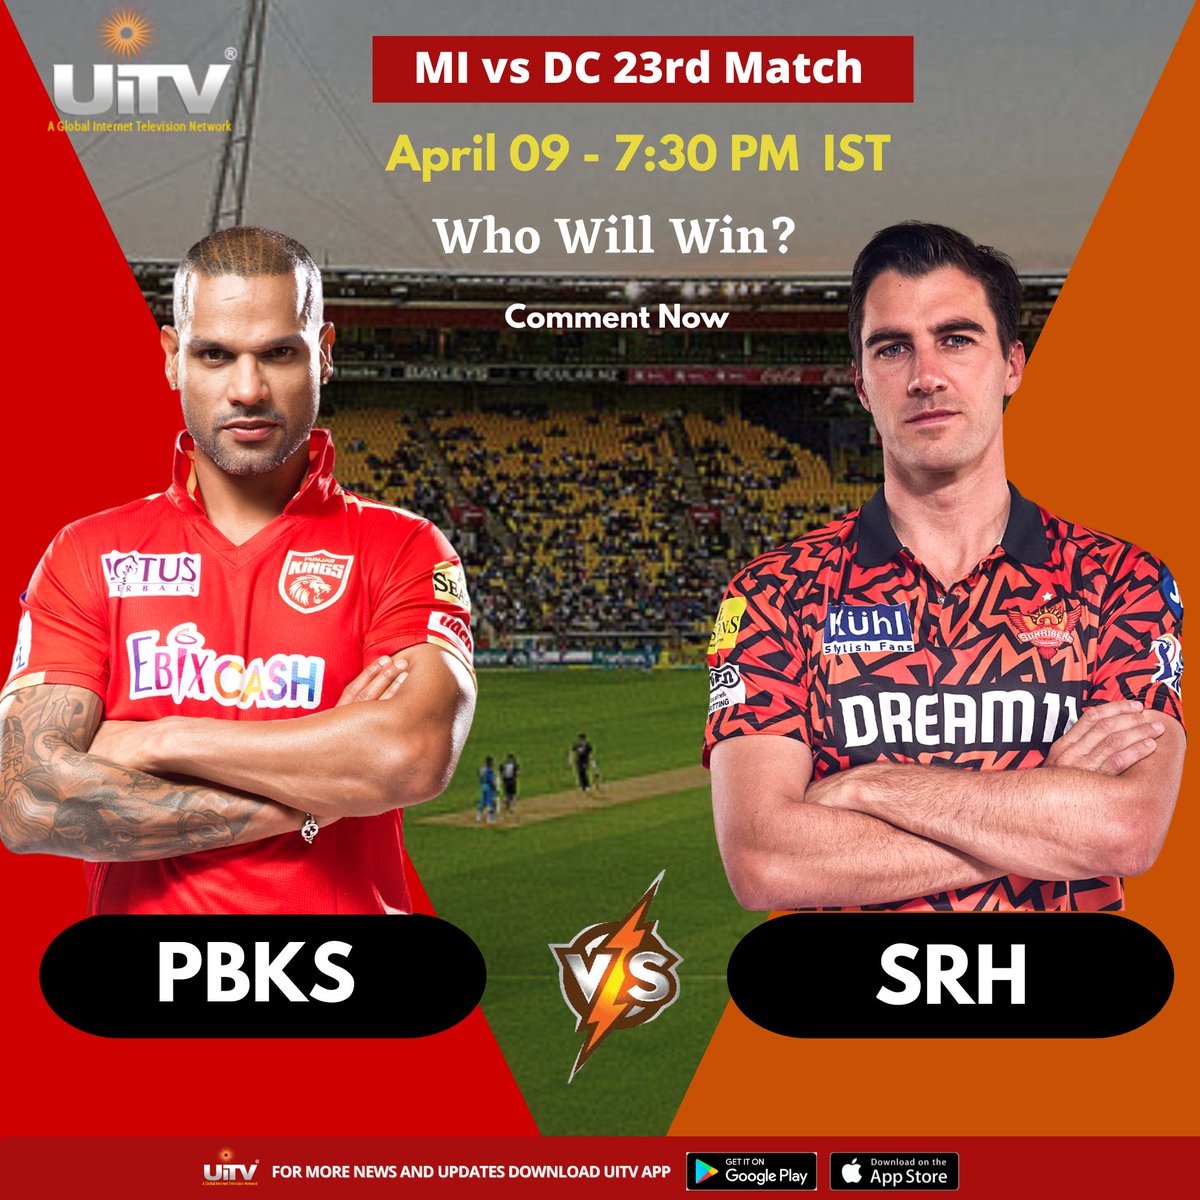 '🏏 Excitement is in the air as the battle unfolds! 🌟 PBKS vs SRH promises to be a nail-biting showdown! 🎉 Who will emerge victorious tonight? 🏆 Don't miss a single moment of the action! 🔥 #PBKSvsSRH #IPL2024 #CricketFever #GameOn #CricketFansUnite #T20Action' 🏏🔥